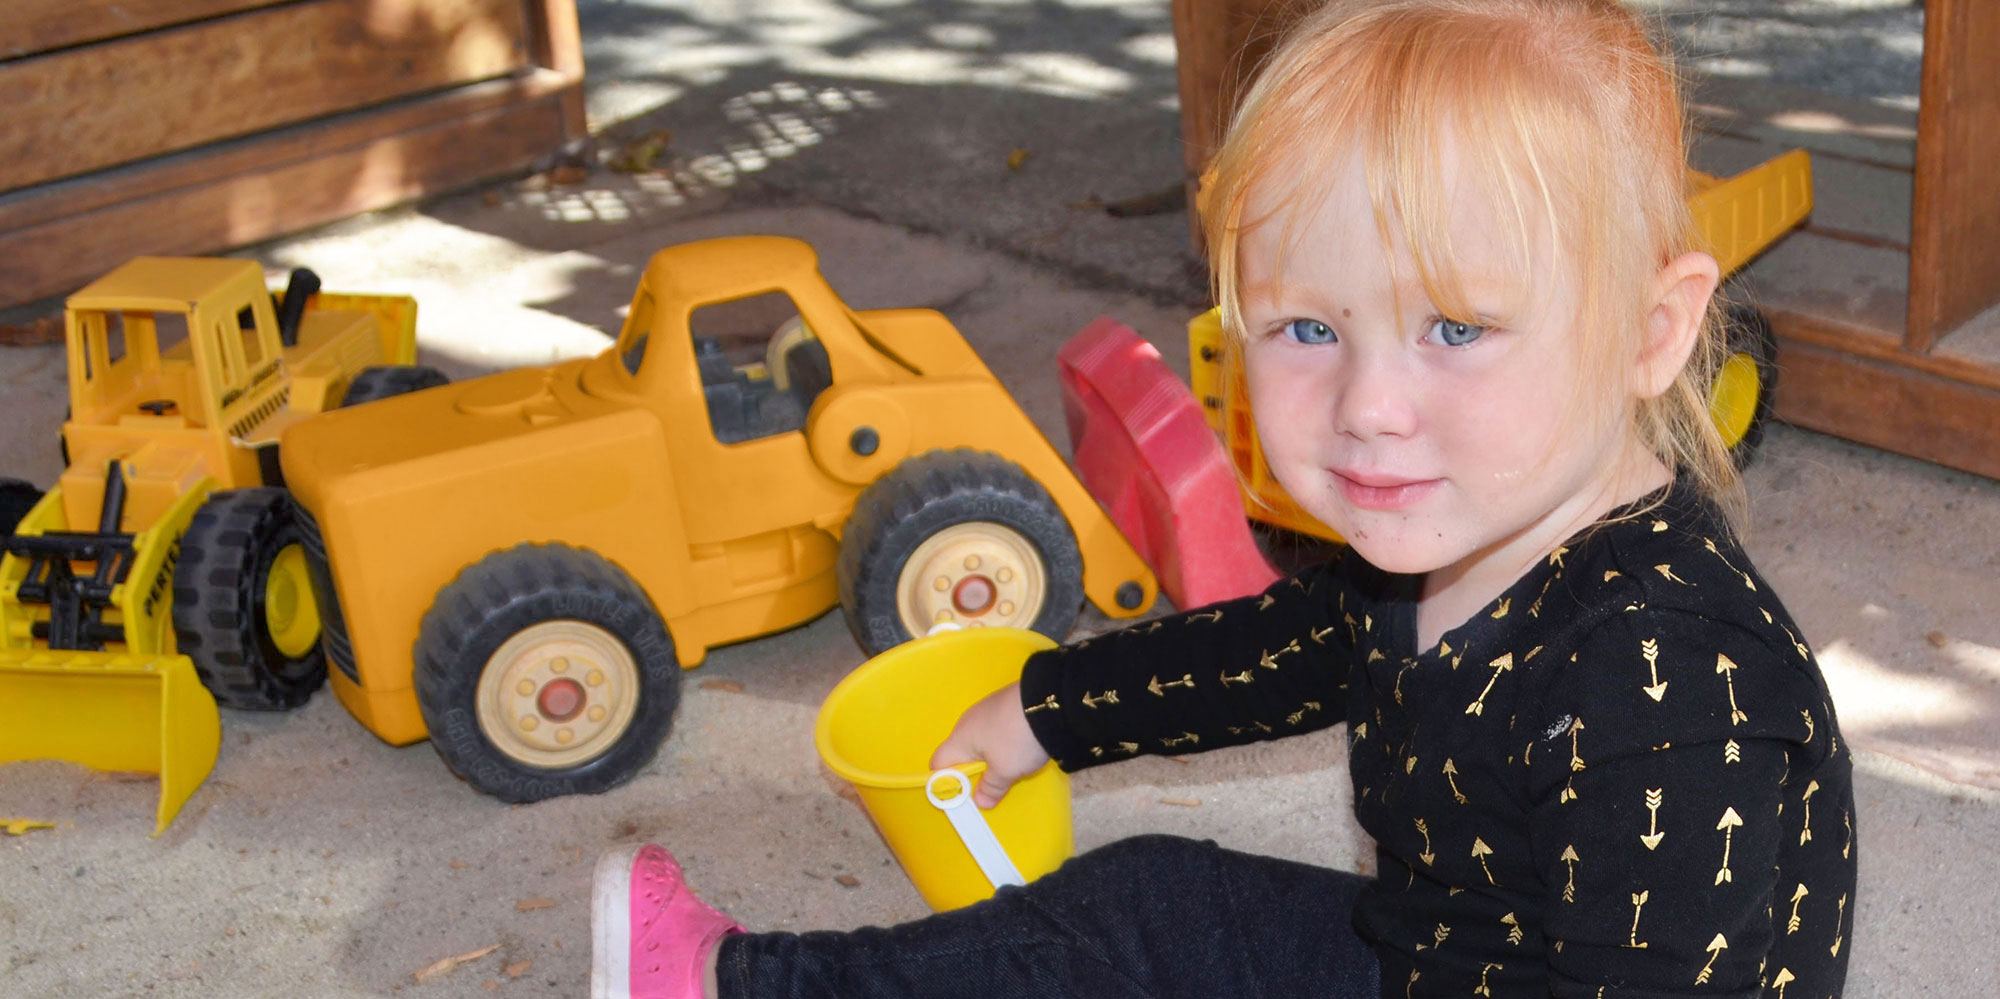 Girl playing with toy trucks